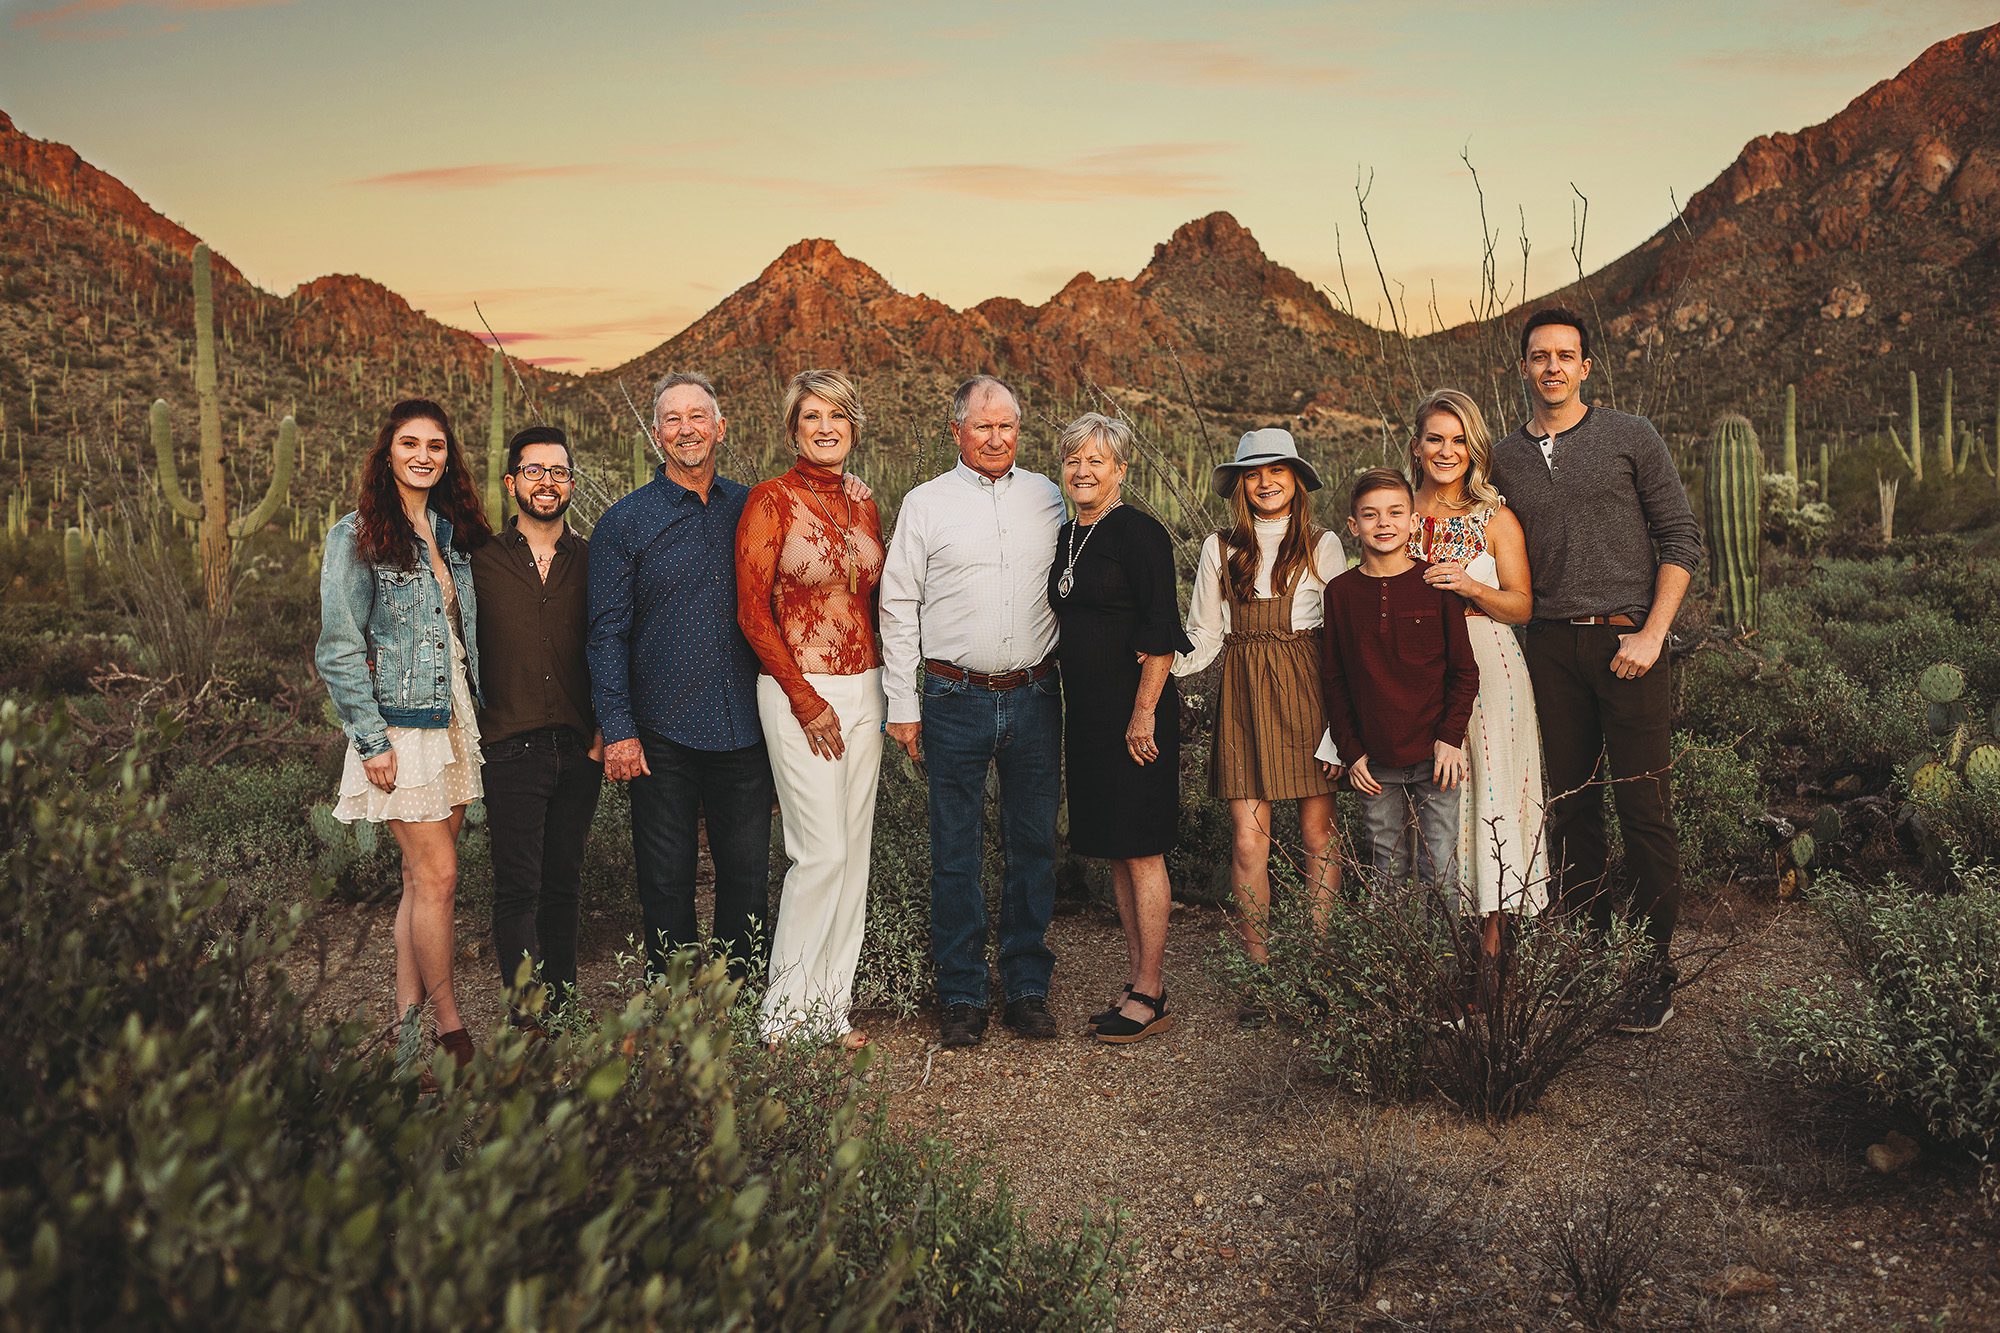 The mountains of Gates Pass in Tucson make a beautiful backdrop for this incredible family during their family photo session with Belle Vie Photography in Tucson